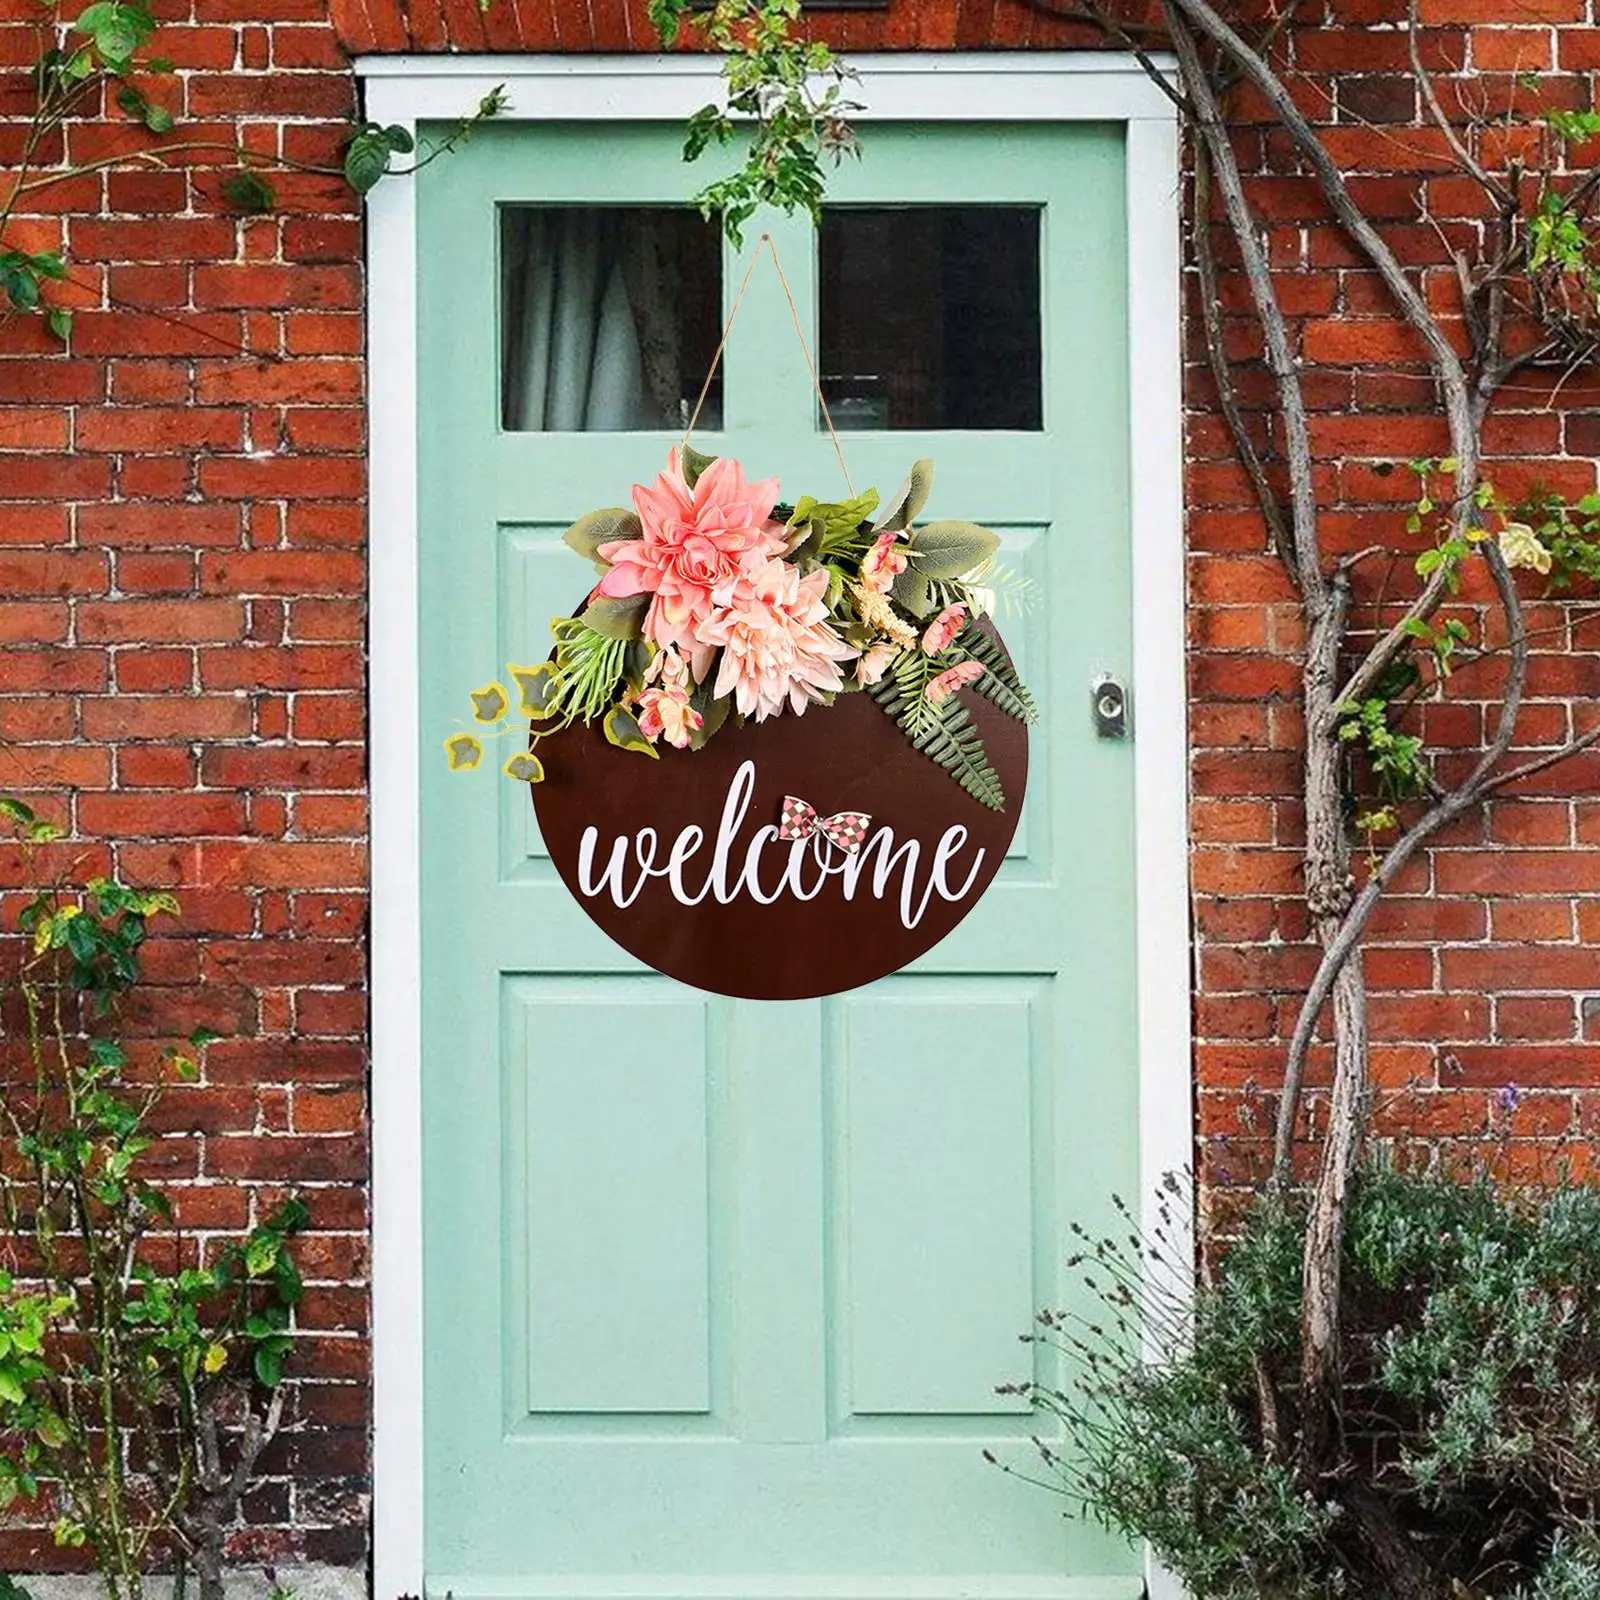 Welcome Hanging Wooden Welcome Home Sign Plaque Letter Sign Centerpieces Wall Decorations for Farmhouse Room Kitchen